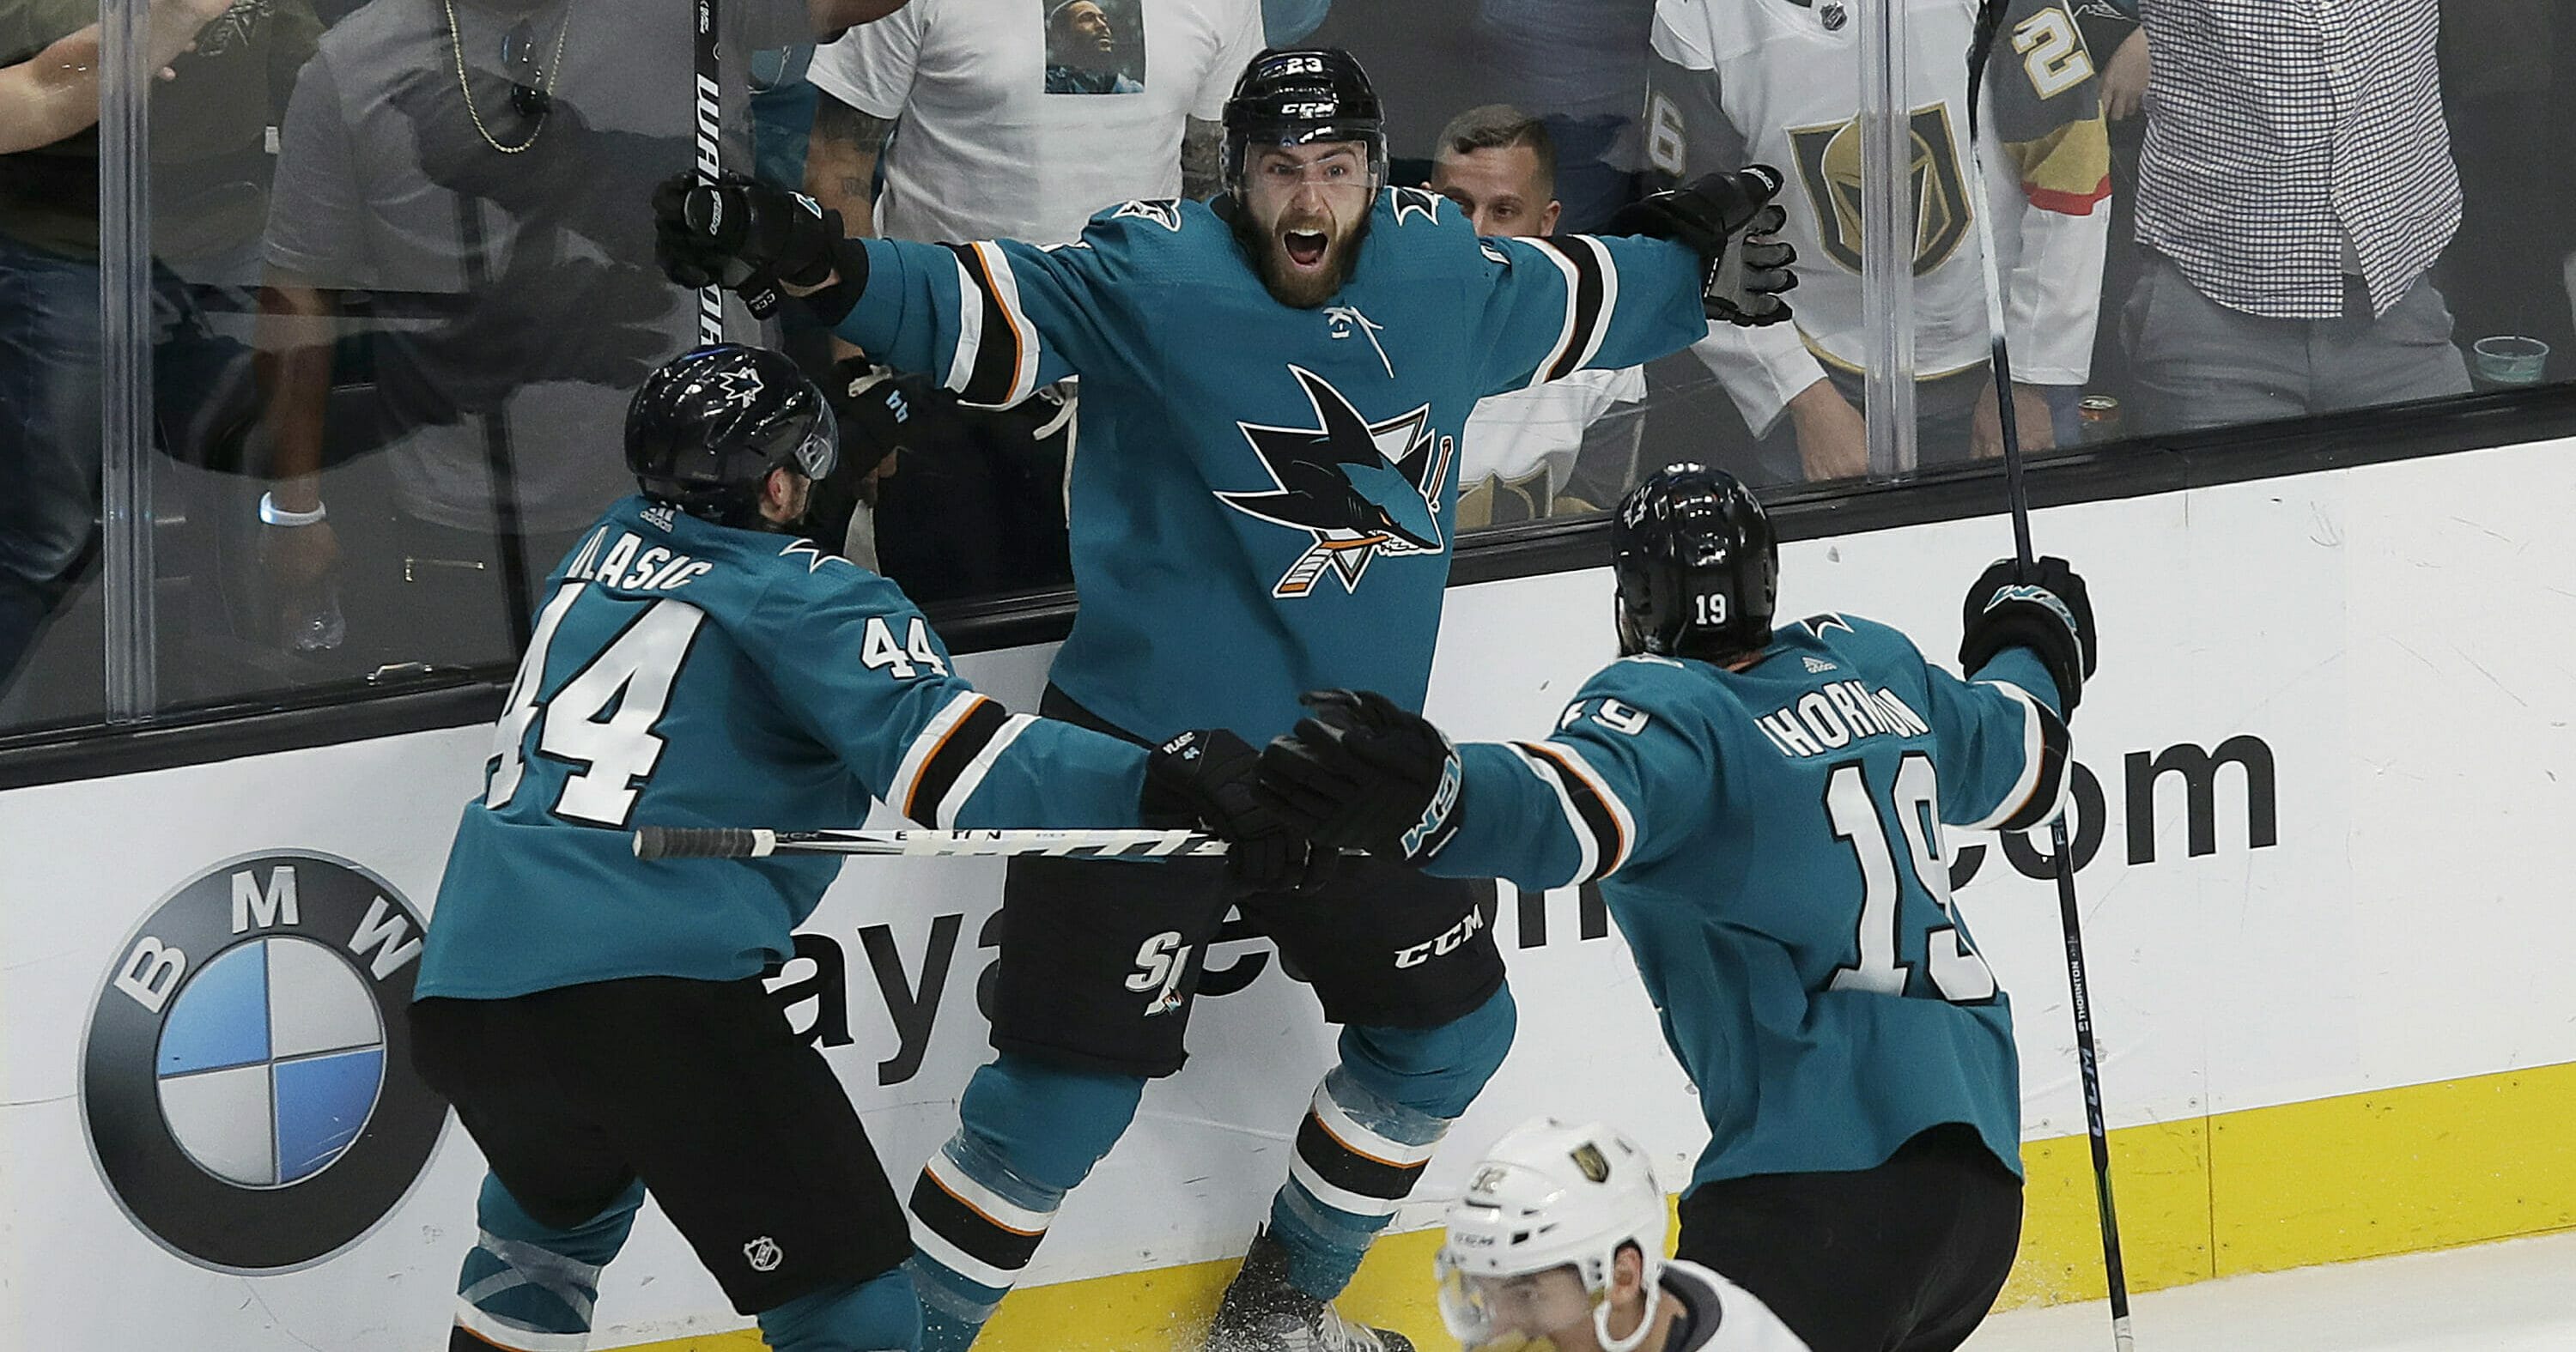 San Jose Sharks right wing Barclay Goodrow, center, celebrates with defenseman Marc-Edouard Vlasic (44) and center Joe Thornton (19) after scoring the winning goal against the Vegas Golden Knights during overtime of Game 7 of their playoff series April 23, 2019.